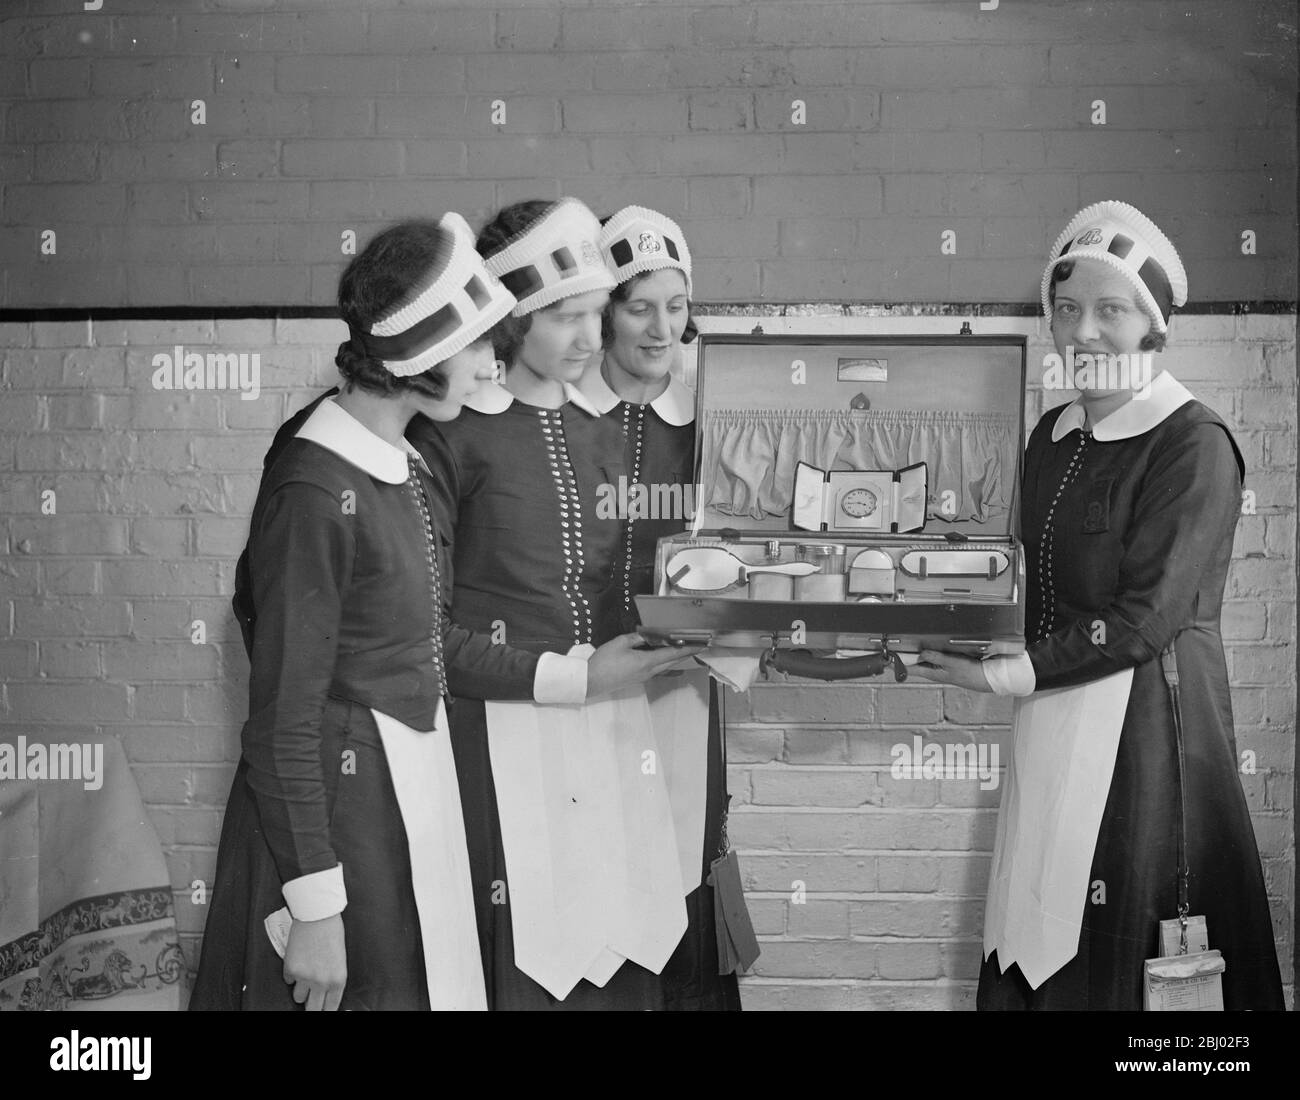 Champion ' Nippy ' - Miss Dorothy Porter , who has been awarded the first prize for efficiency at the annual examination of ' Nippy ' waitresses - 1 March 1932 - - Nippys specifically worked in J. Lyons & Co tea shops and cafes Stock Photo